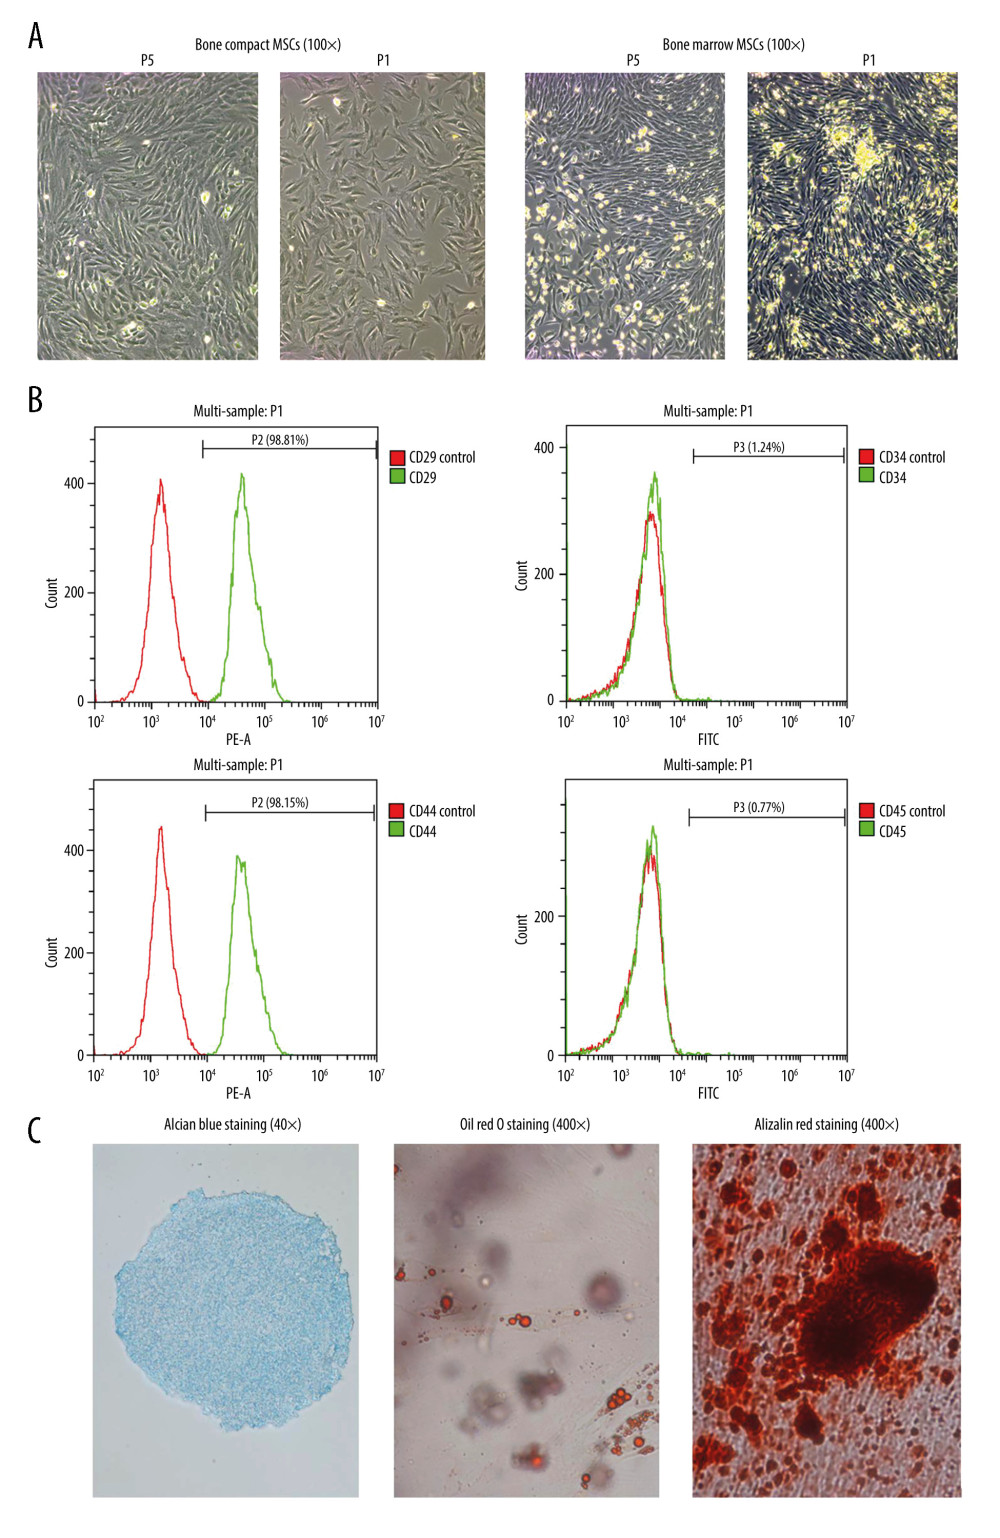 Isolation, culture, and identification of BMSCs-C cells. (A) Morphology of primary bone marrow mesenchymal stem cells (BMSCs) and bone compact mesenchymal stem cells (BMSCs-C) on day 4 (P1) and generation of BMSCs-M and BMSCs-C in P5. (B) Expression of surface biomarkers of BMSCs-C cells (CD29, CD44, CD34, CD45) in P5. (C) Alizarin red staining (Magnification, 400×; red staining) of osteogenic induction, oil red O staining of adipogenic induction (Magnification, 400×; red staining) and Alcian blue staining (Magnification, 400×, blue staining) of chondrogenic induction in BMSCs-C cells. Data analysis was carried out using SPSS Statistics version 22.0 (IBM SPSS, Inc., Chicago, IL, USA).